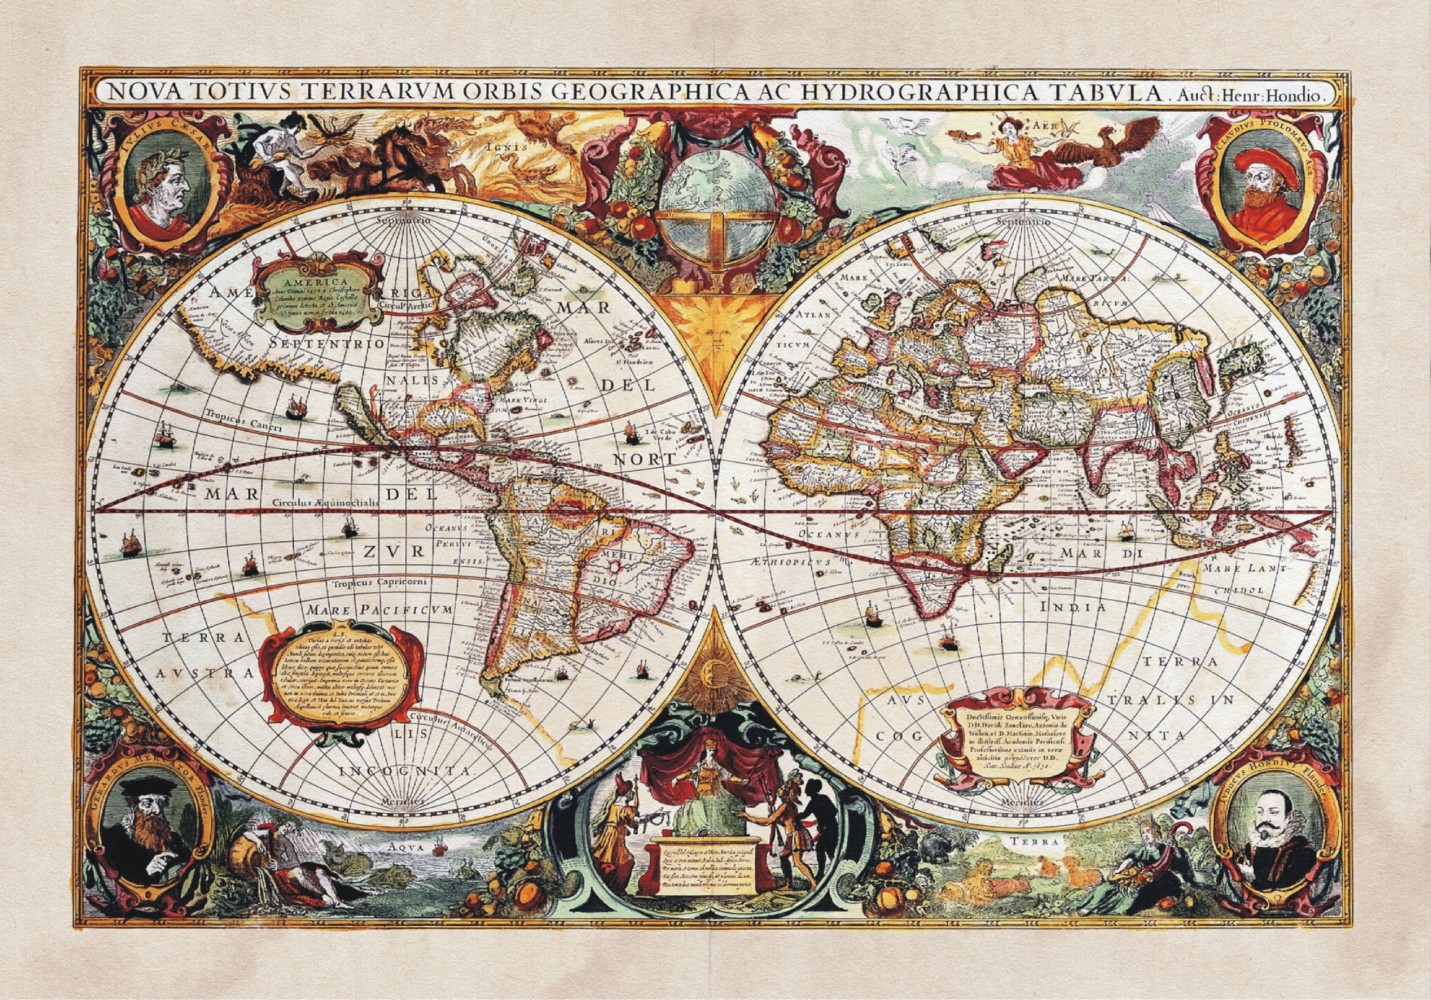 Xxl Poster Wall Mural Wallpaper History World Map Geography Photo